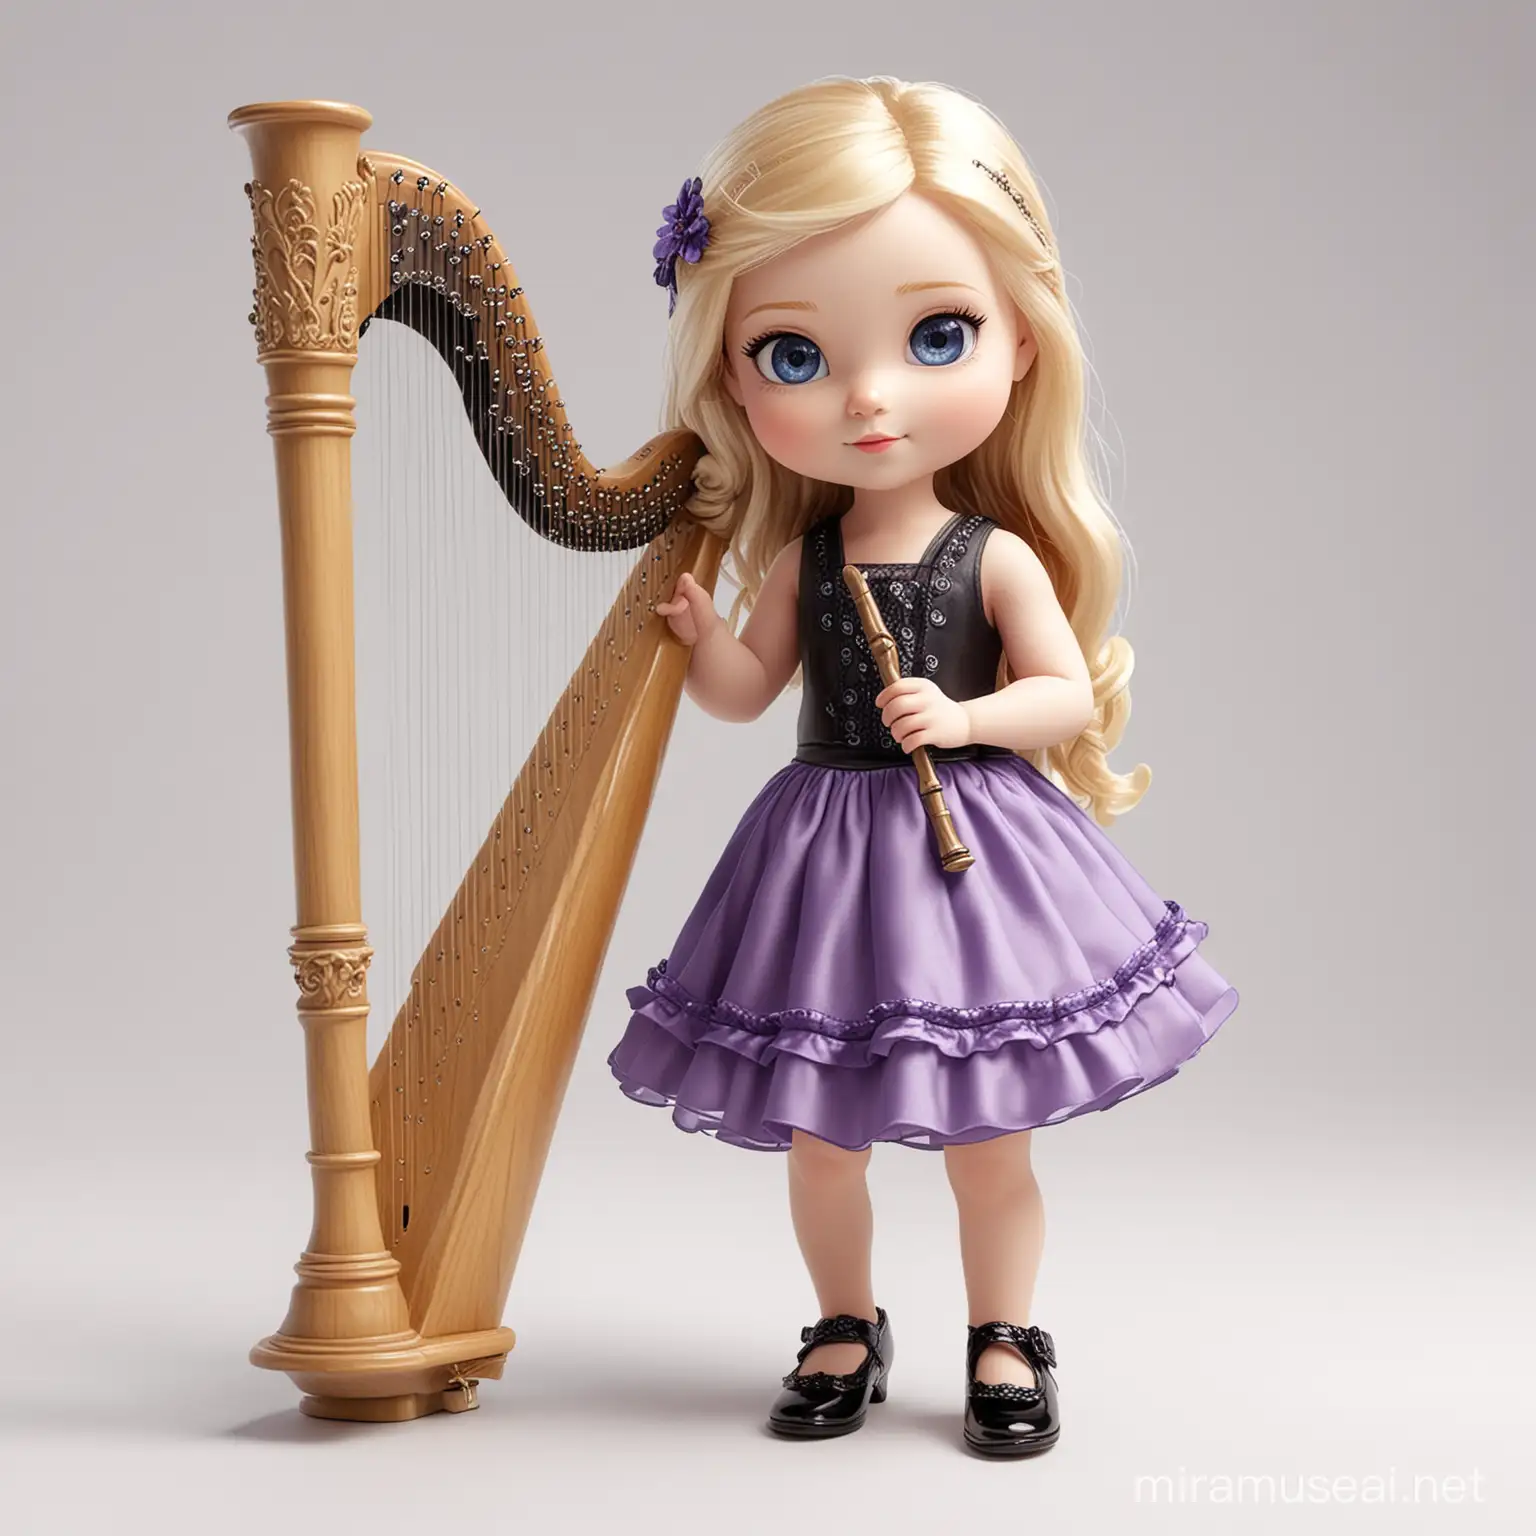 BlondHaired Girl Playing Harp and Flute in Chibi Style on White Background